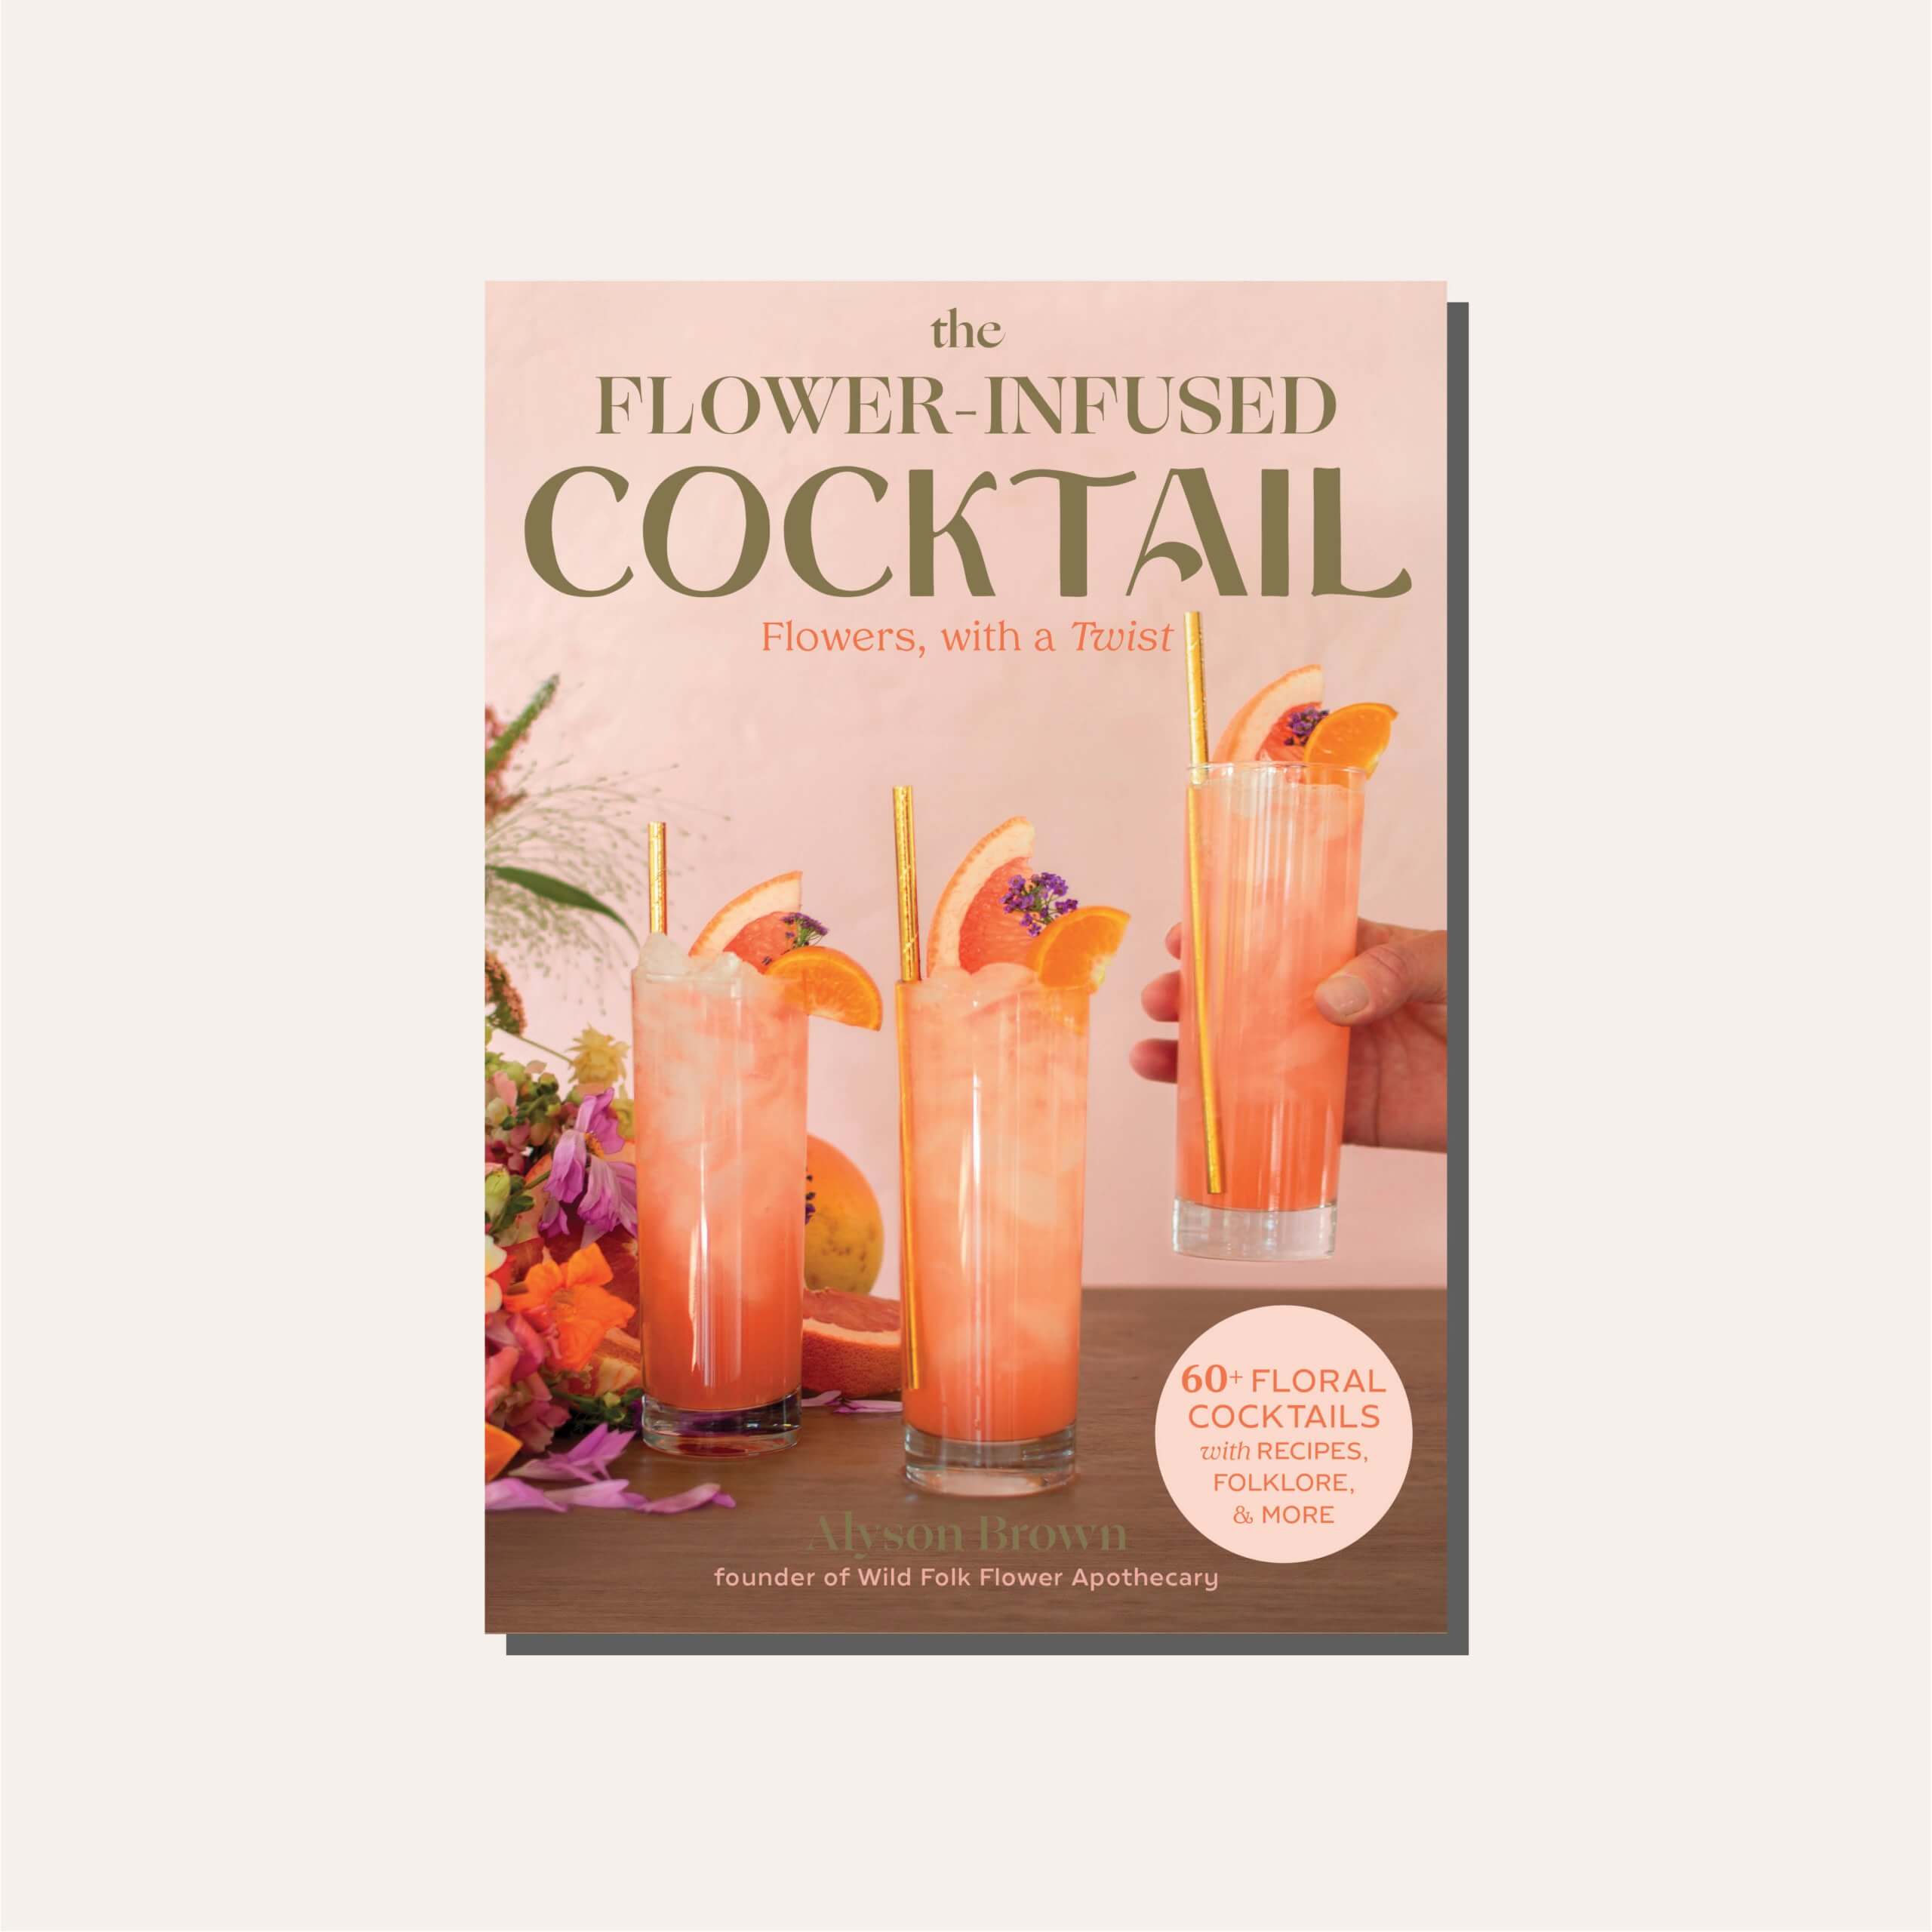 Alyson Brown's The Flower-Infused Cocktail cookbook cover in a light frame